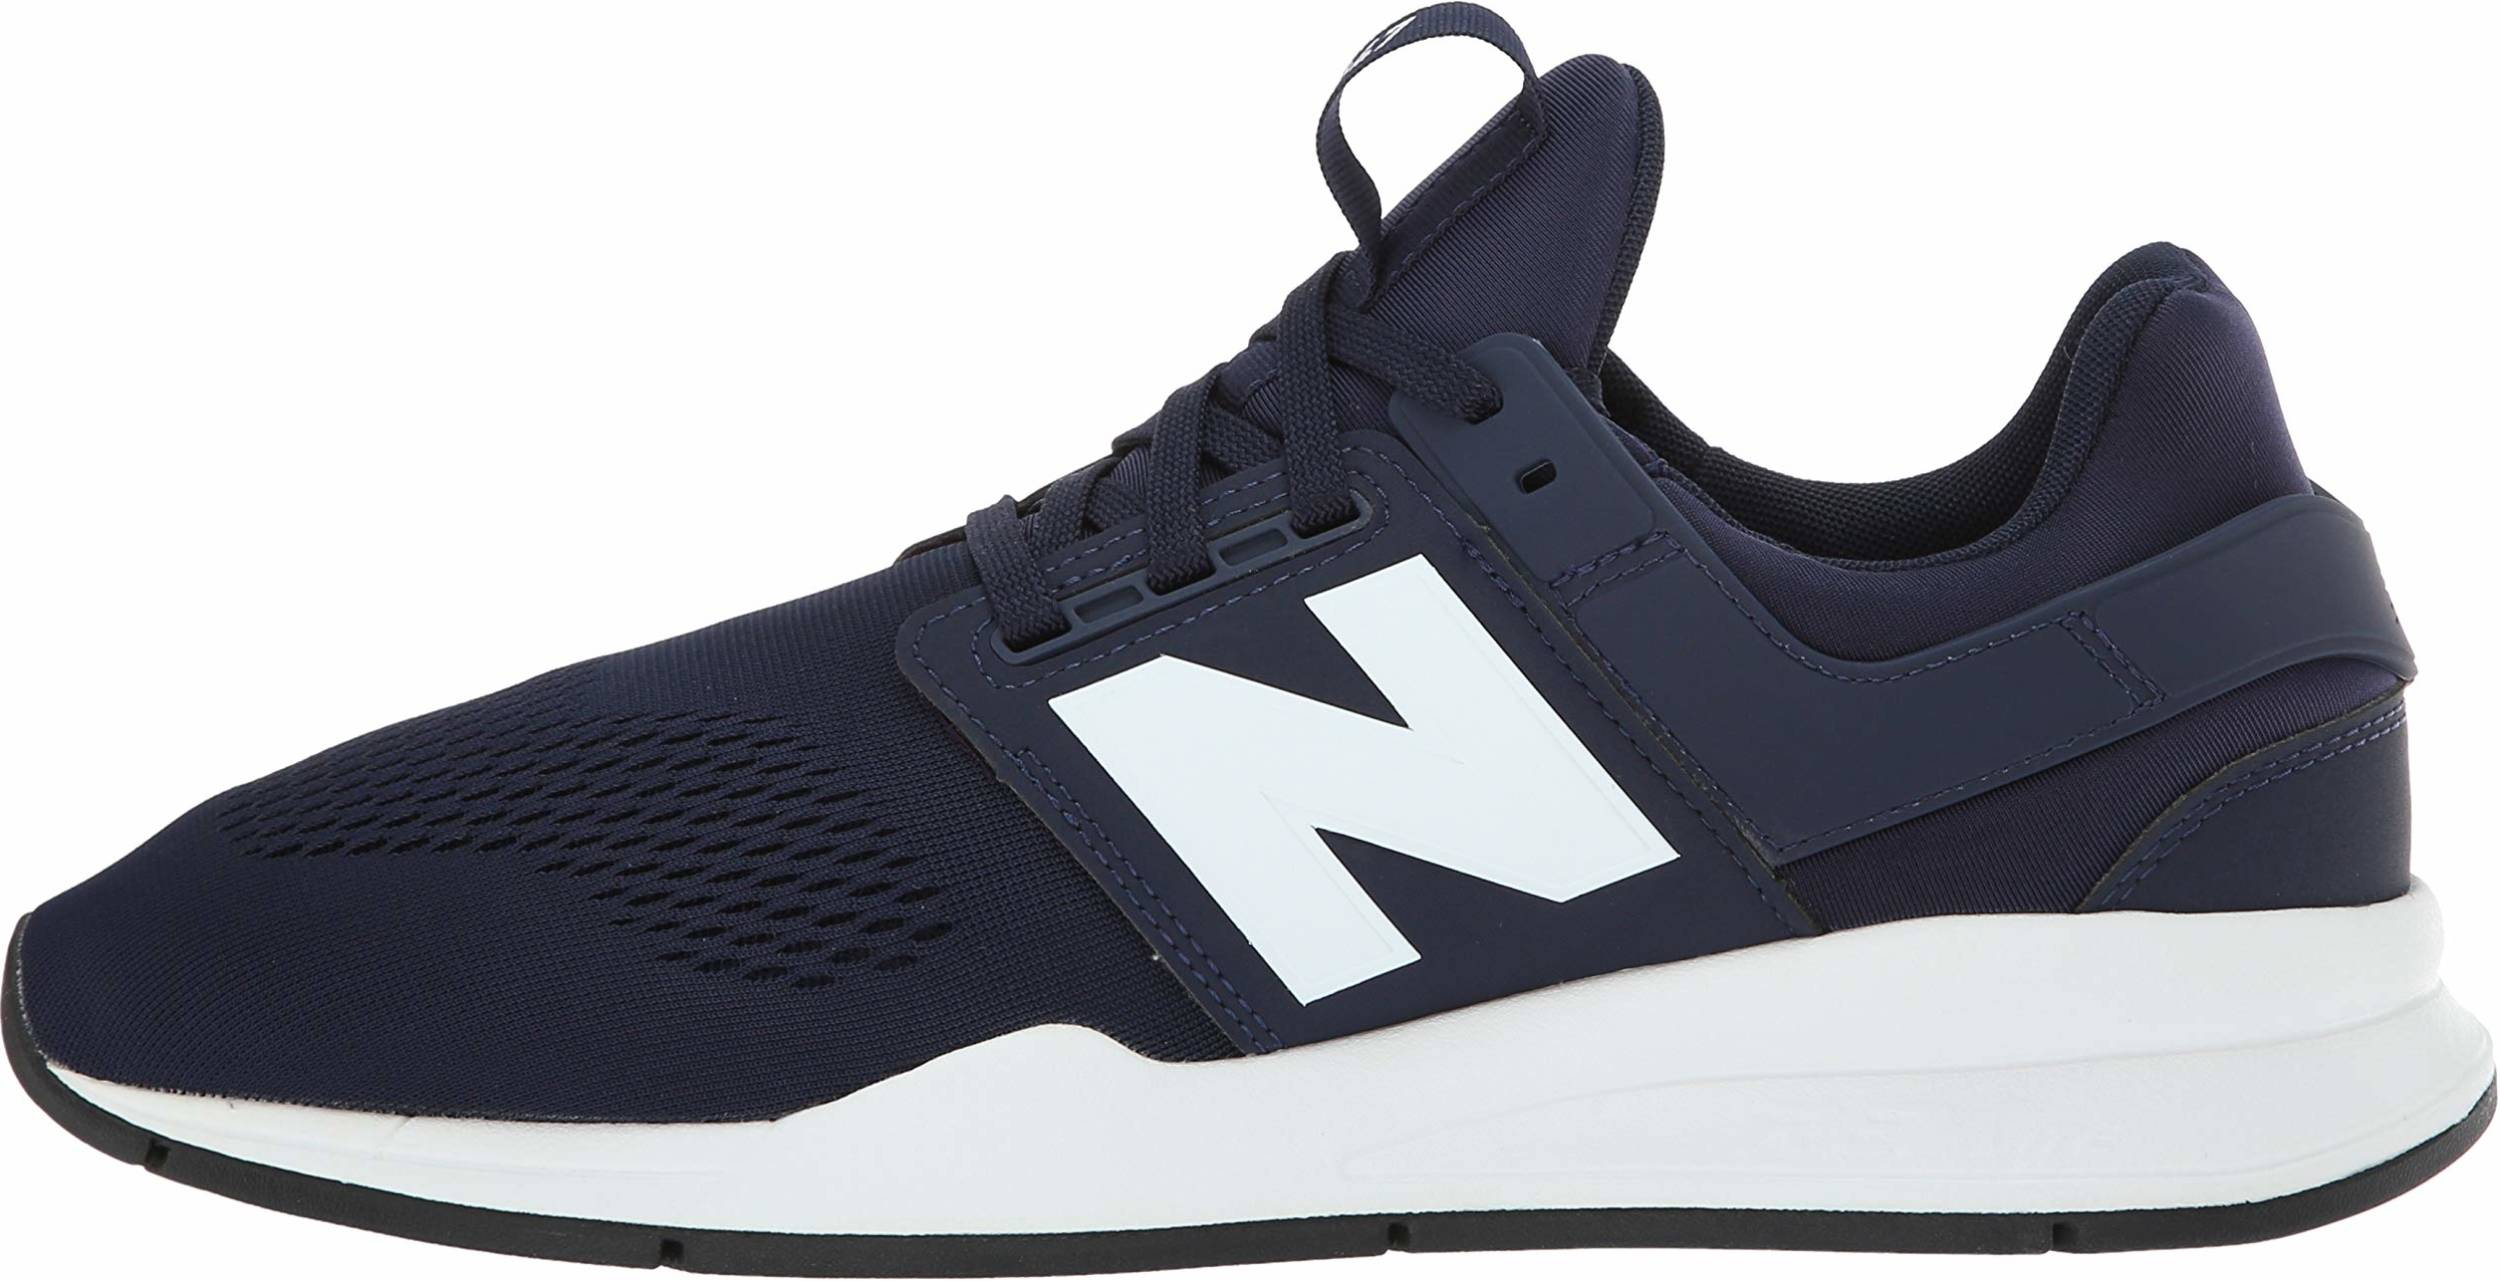 New Balance 247 collection v2 sneakers in 10 colors (only $45 ...